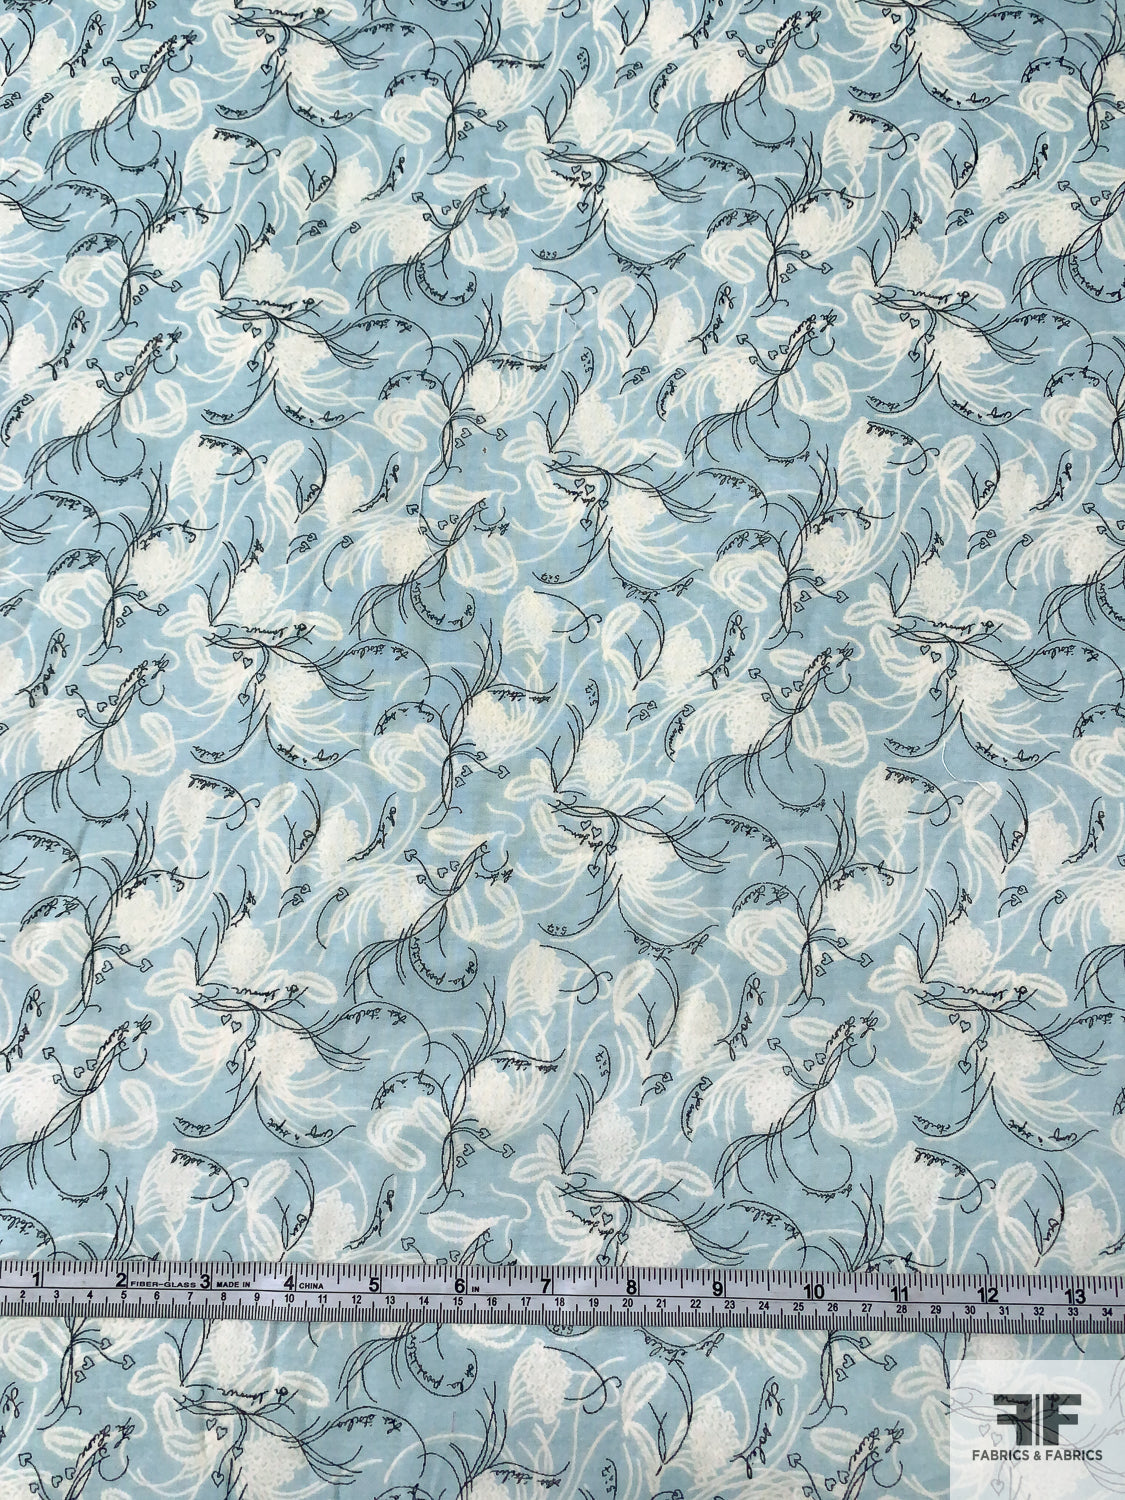 Delicate Hearts in Floral with French Script Printed Cotton Voile - Sky Blue / Off-White / Black